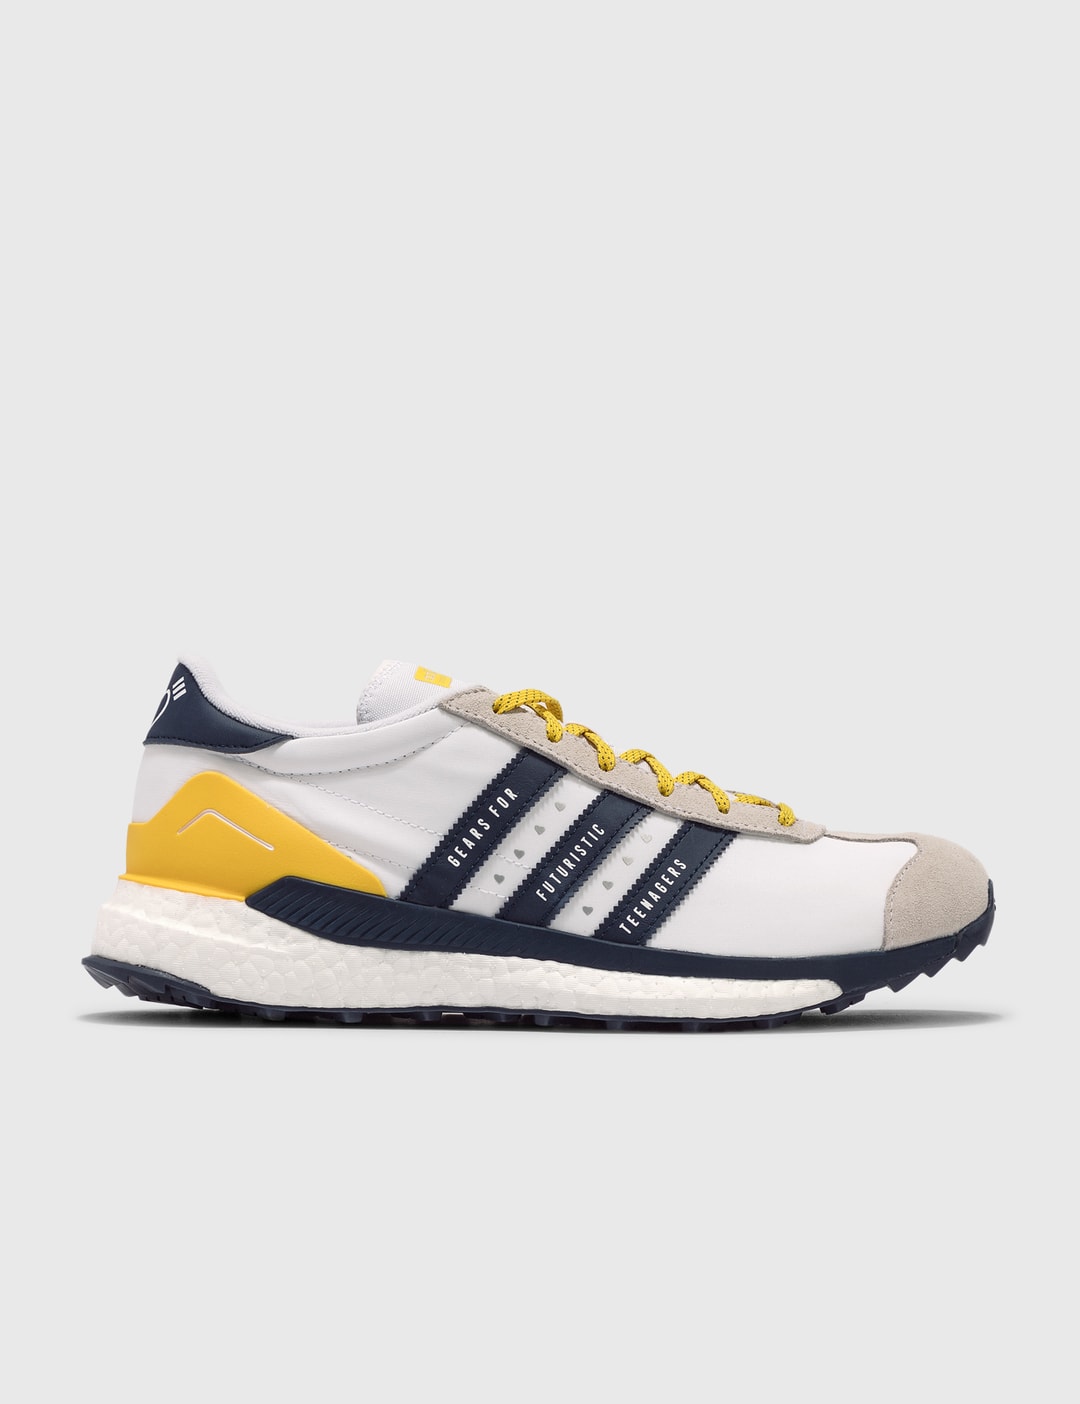 pistón Arenoso Dirigir Adidas Originals - Human Made X adidas Consortium Country Free Hiker | HBX  - Globally Curated Fashion and Lifestyle by Hypebeast